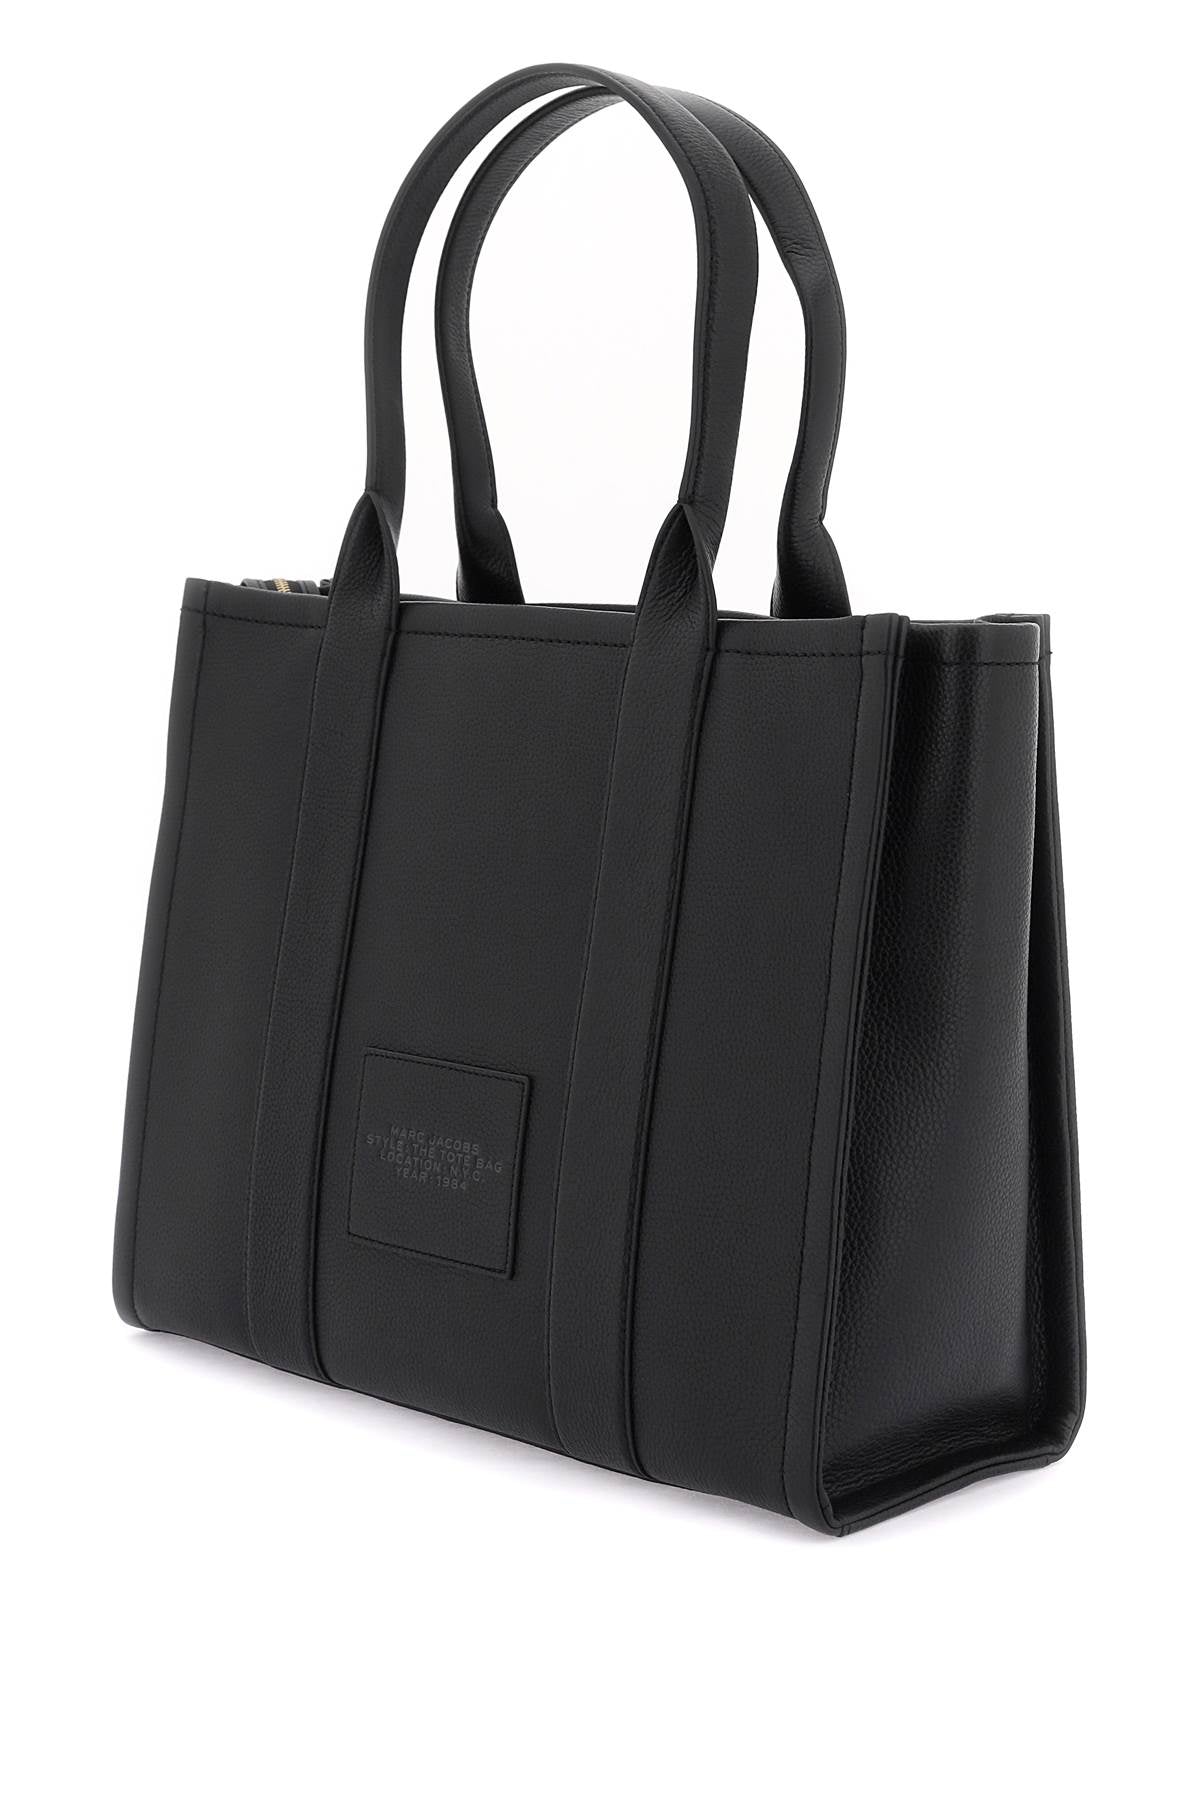 Marc Jacobs The Leather Large Tote Bag Black